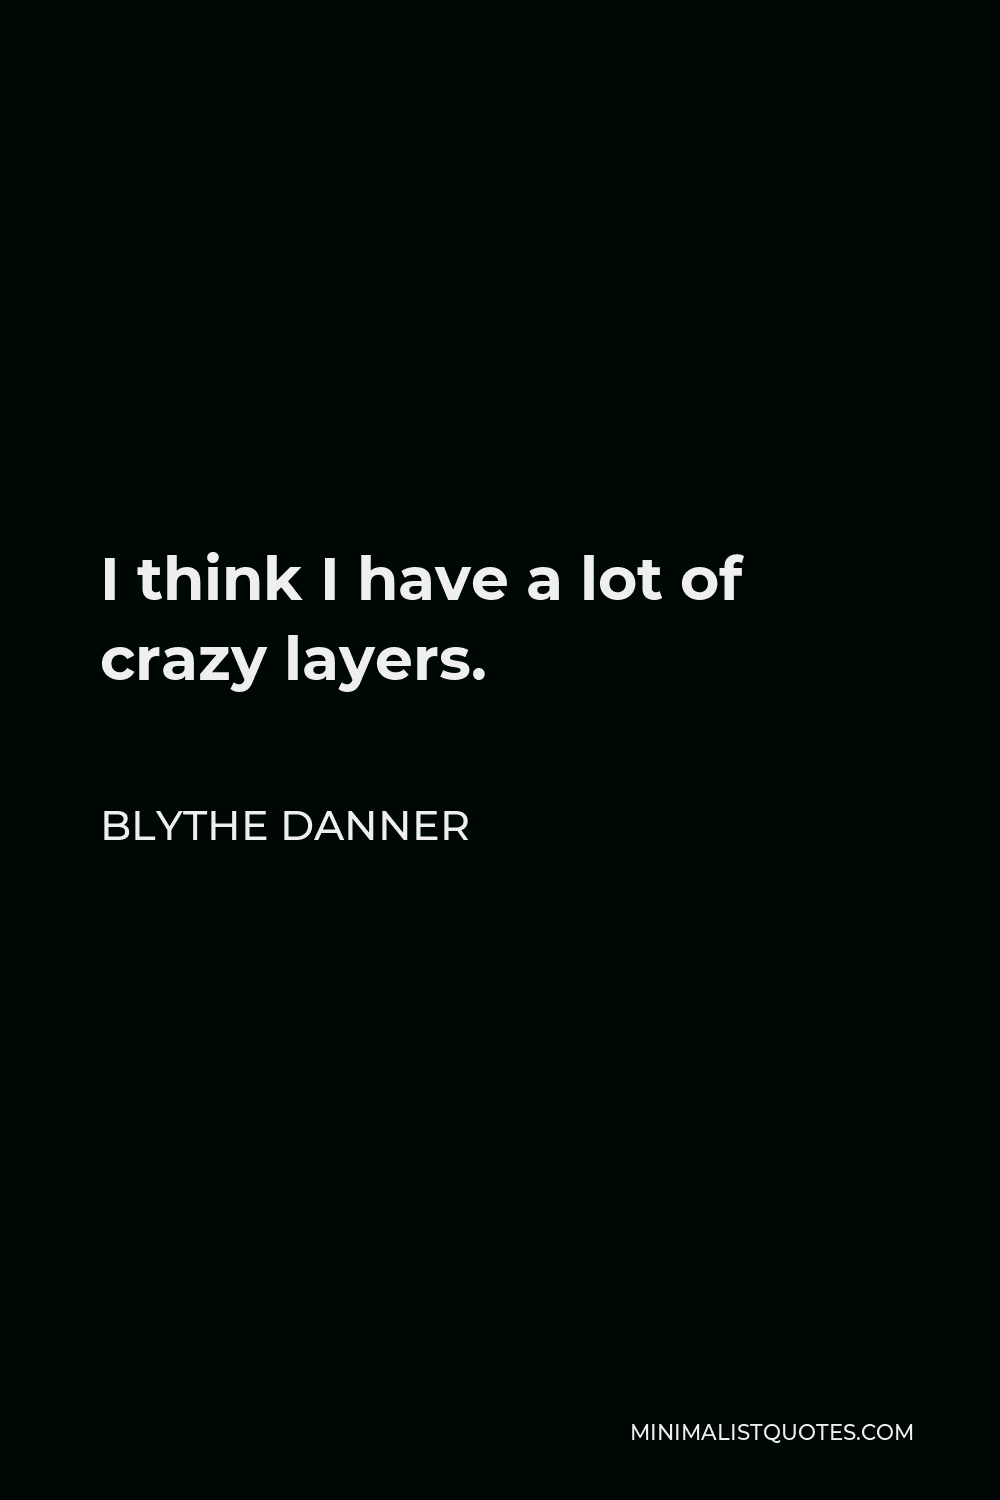 Blythe Danner Quote - I think I have a lot of crazy layers.